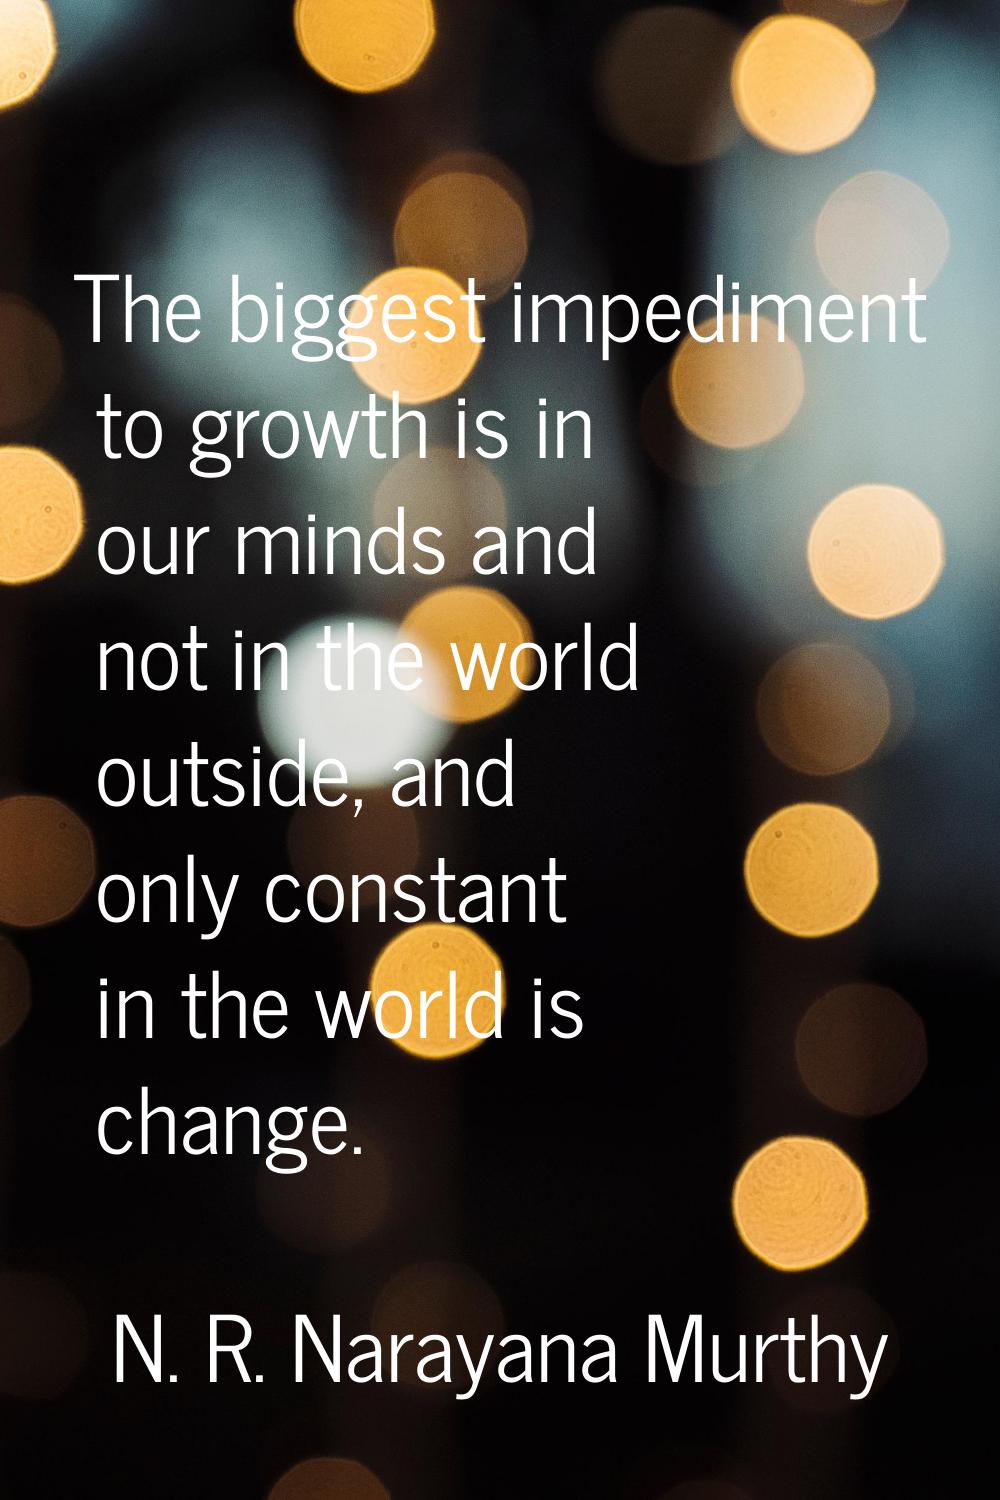 The biggest impediment to growth is in our minds and not in the world outside, and only constant in